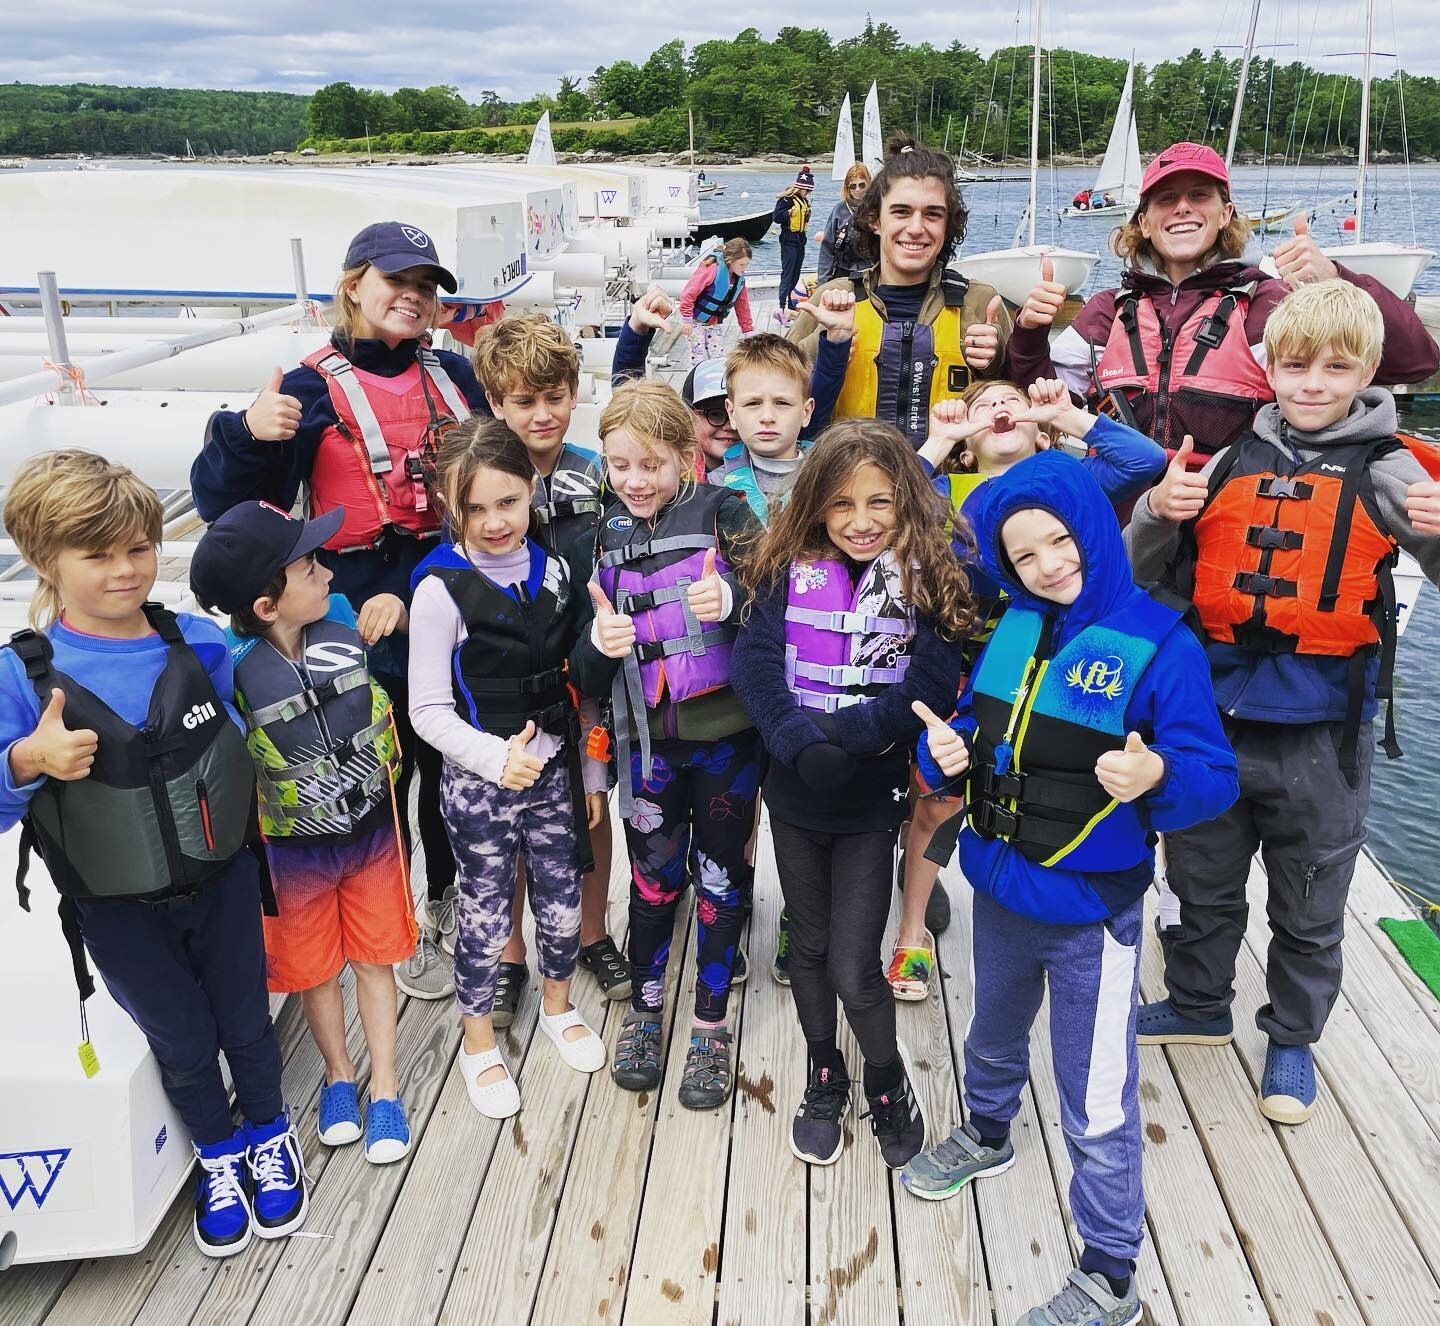 Summer 2023 countdown! ⛵️🔥😎 120 days until the first swim test! Yeeeoow! Class registration is open. Check out the link in bio. #kidswhosail #summer2023countdown #kseasail